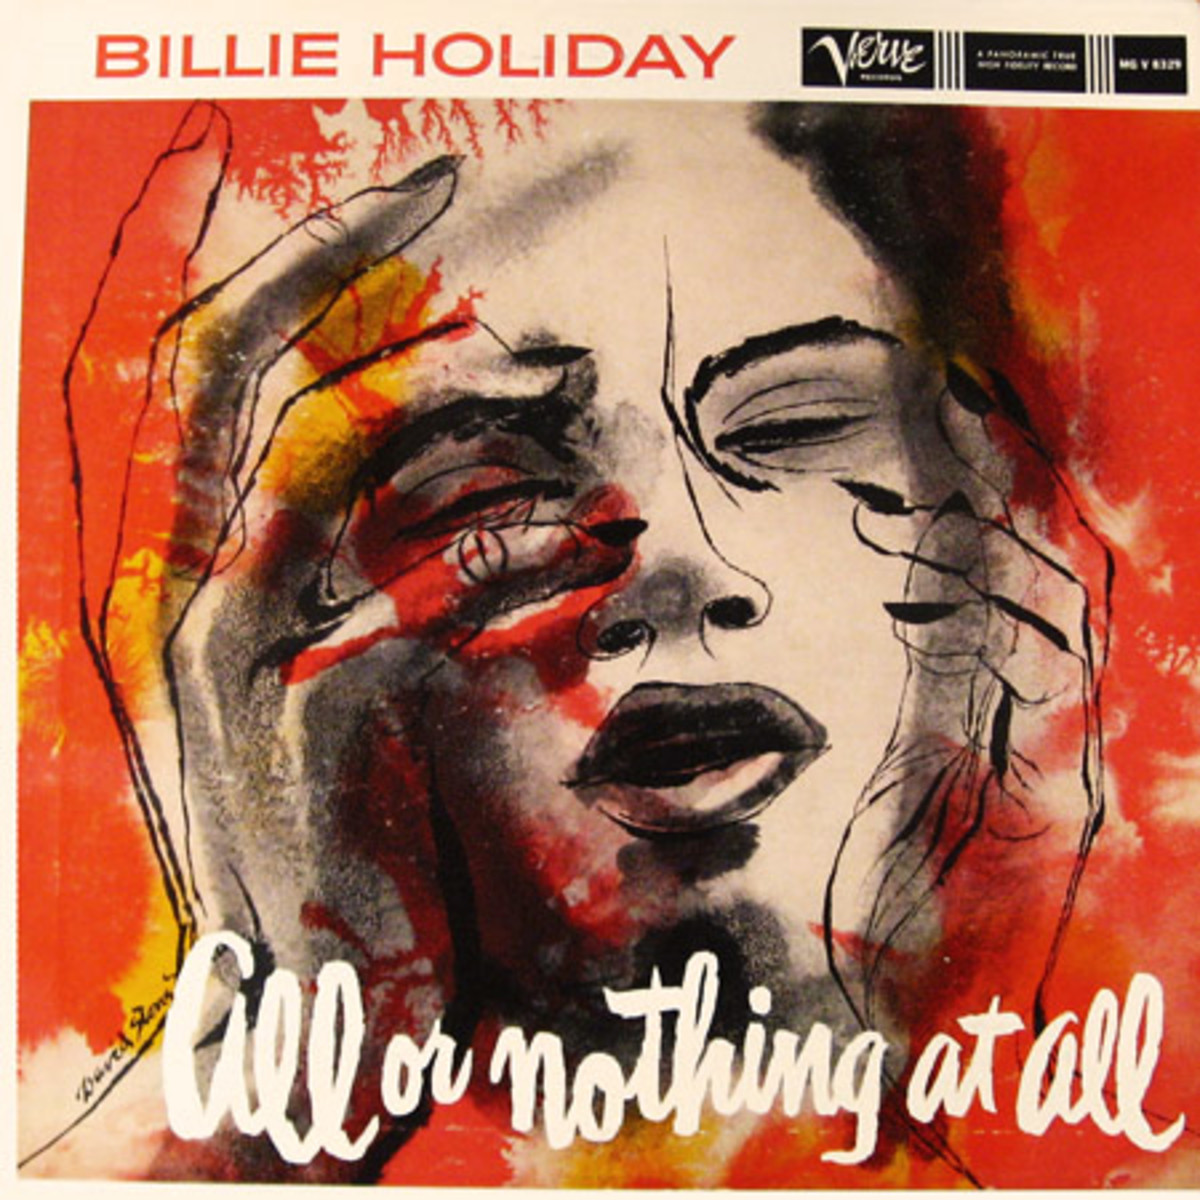 Billie Holiday "All or Nothing at All," Verve Records MG V 8329 12" LP Vinyl Record (1957). Album cover art by David Stone Martin.